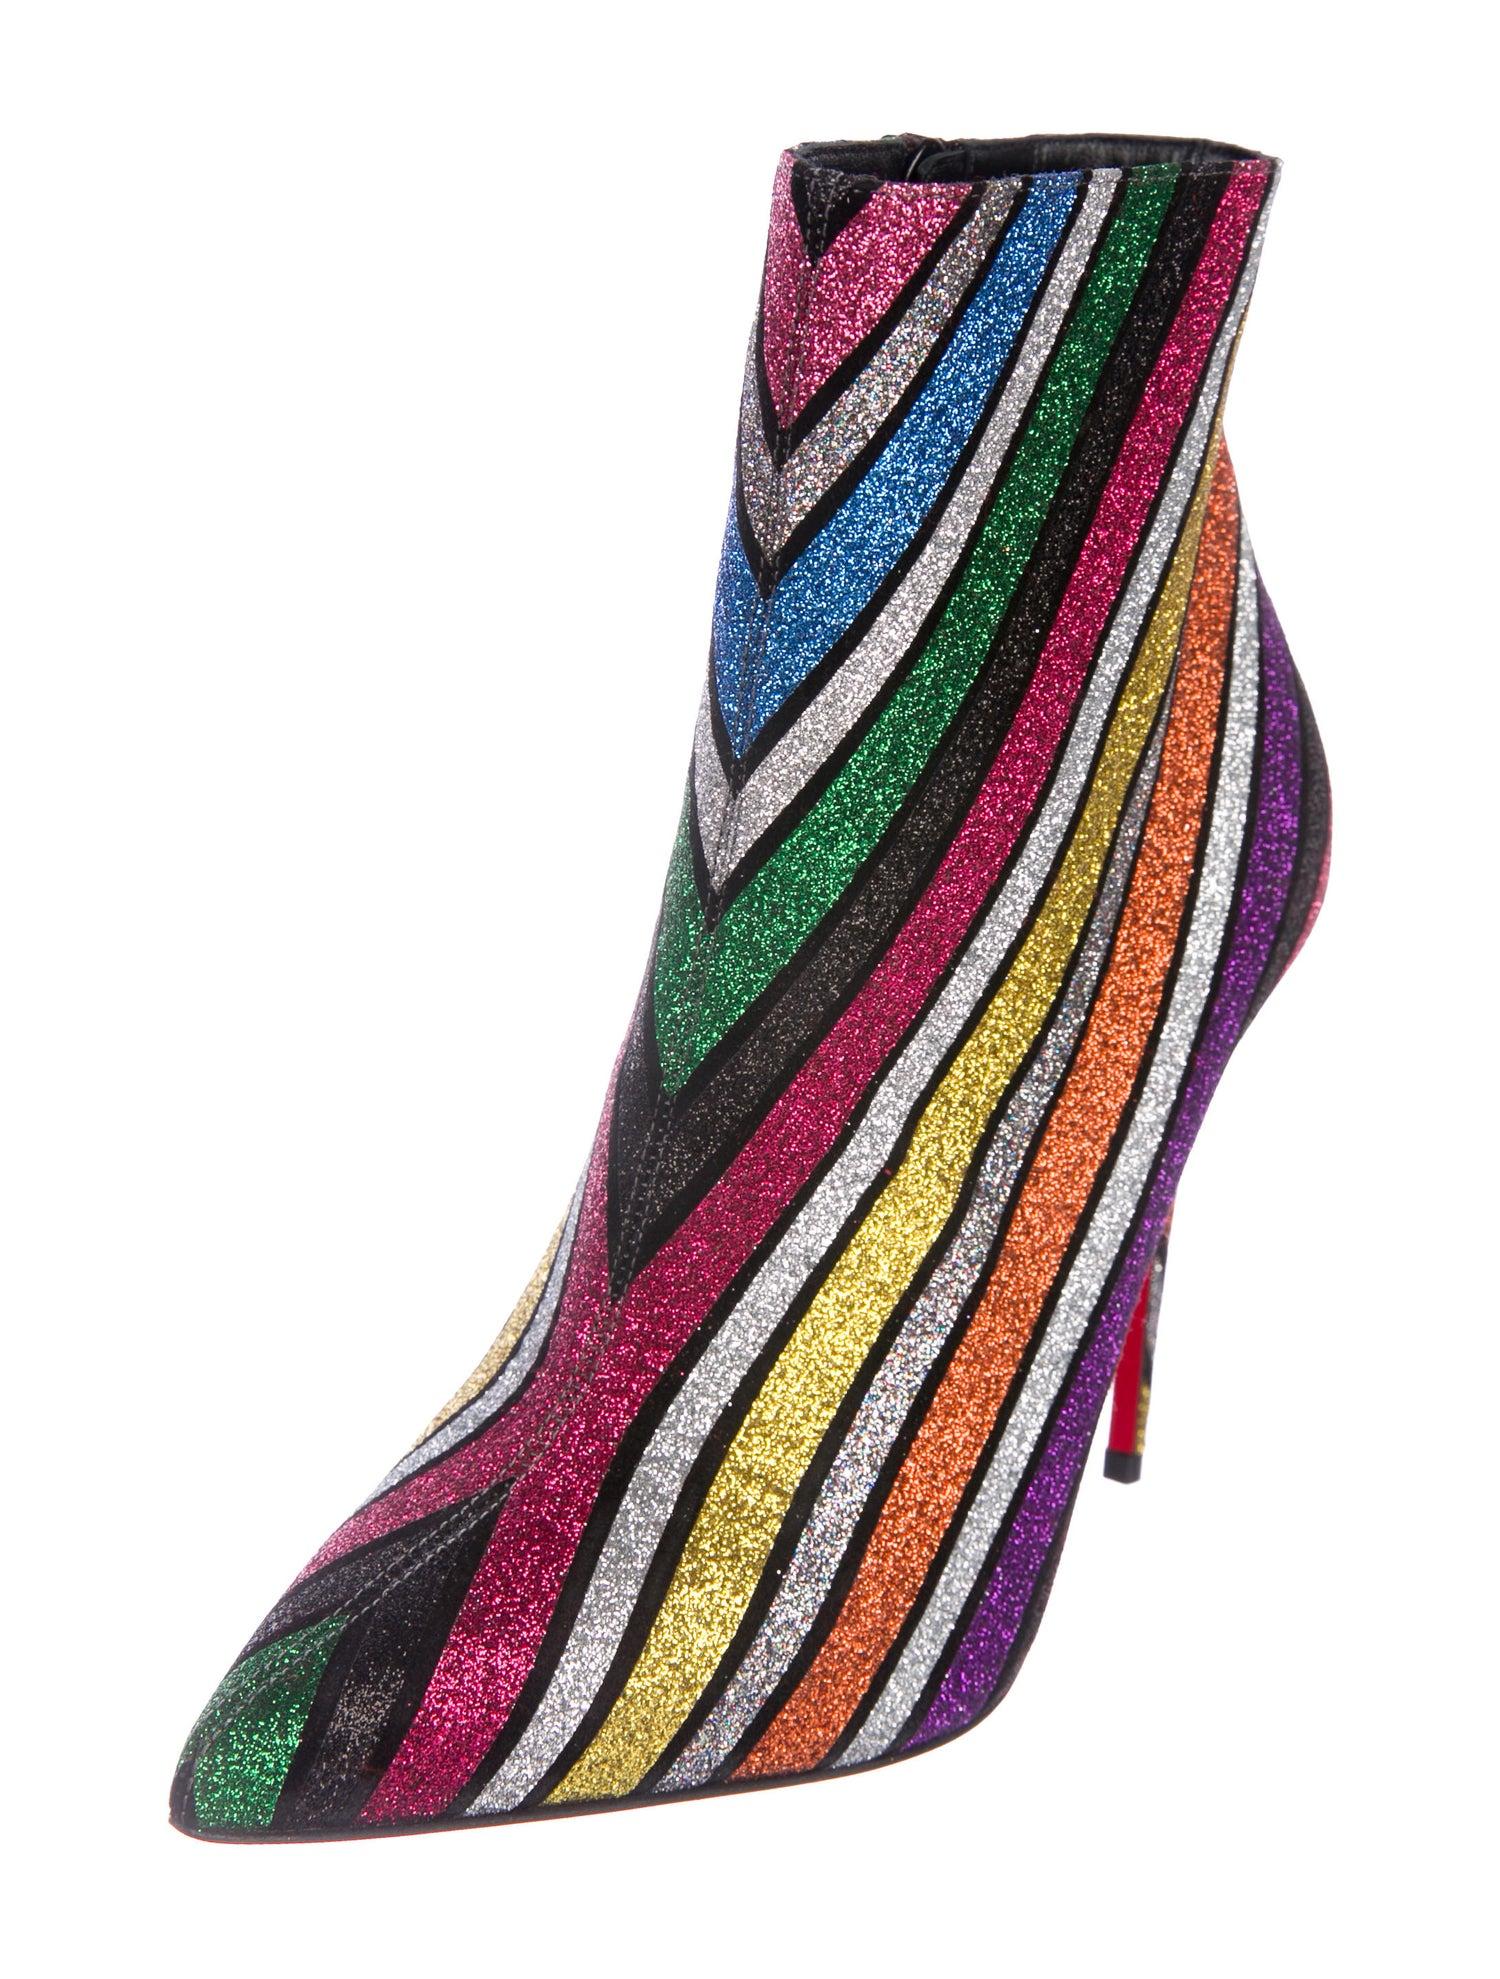 Christian Louboutin NEW Multi Color Glitter Stripe Ankle Booties Boots in Box 

Size IT 36.5
Leather
Glitter
Zip closure 
Made in Italy
Heel height 4.25